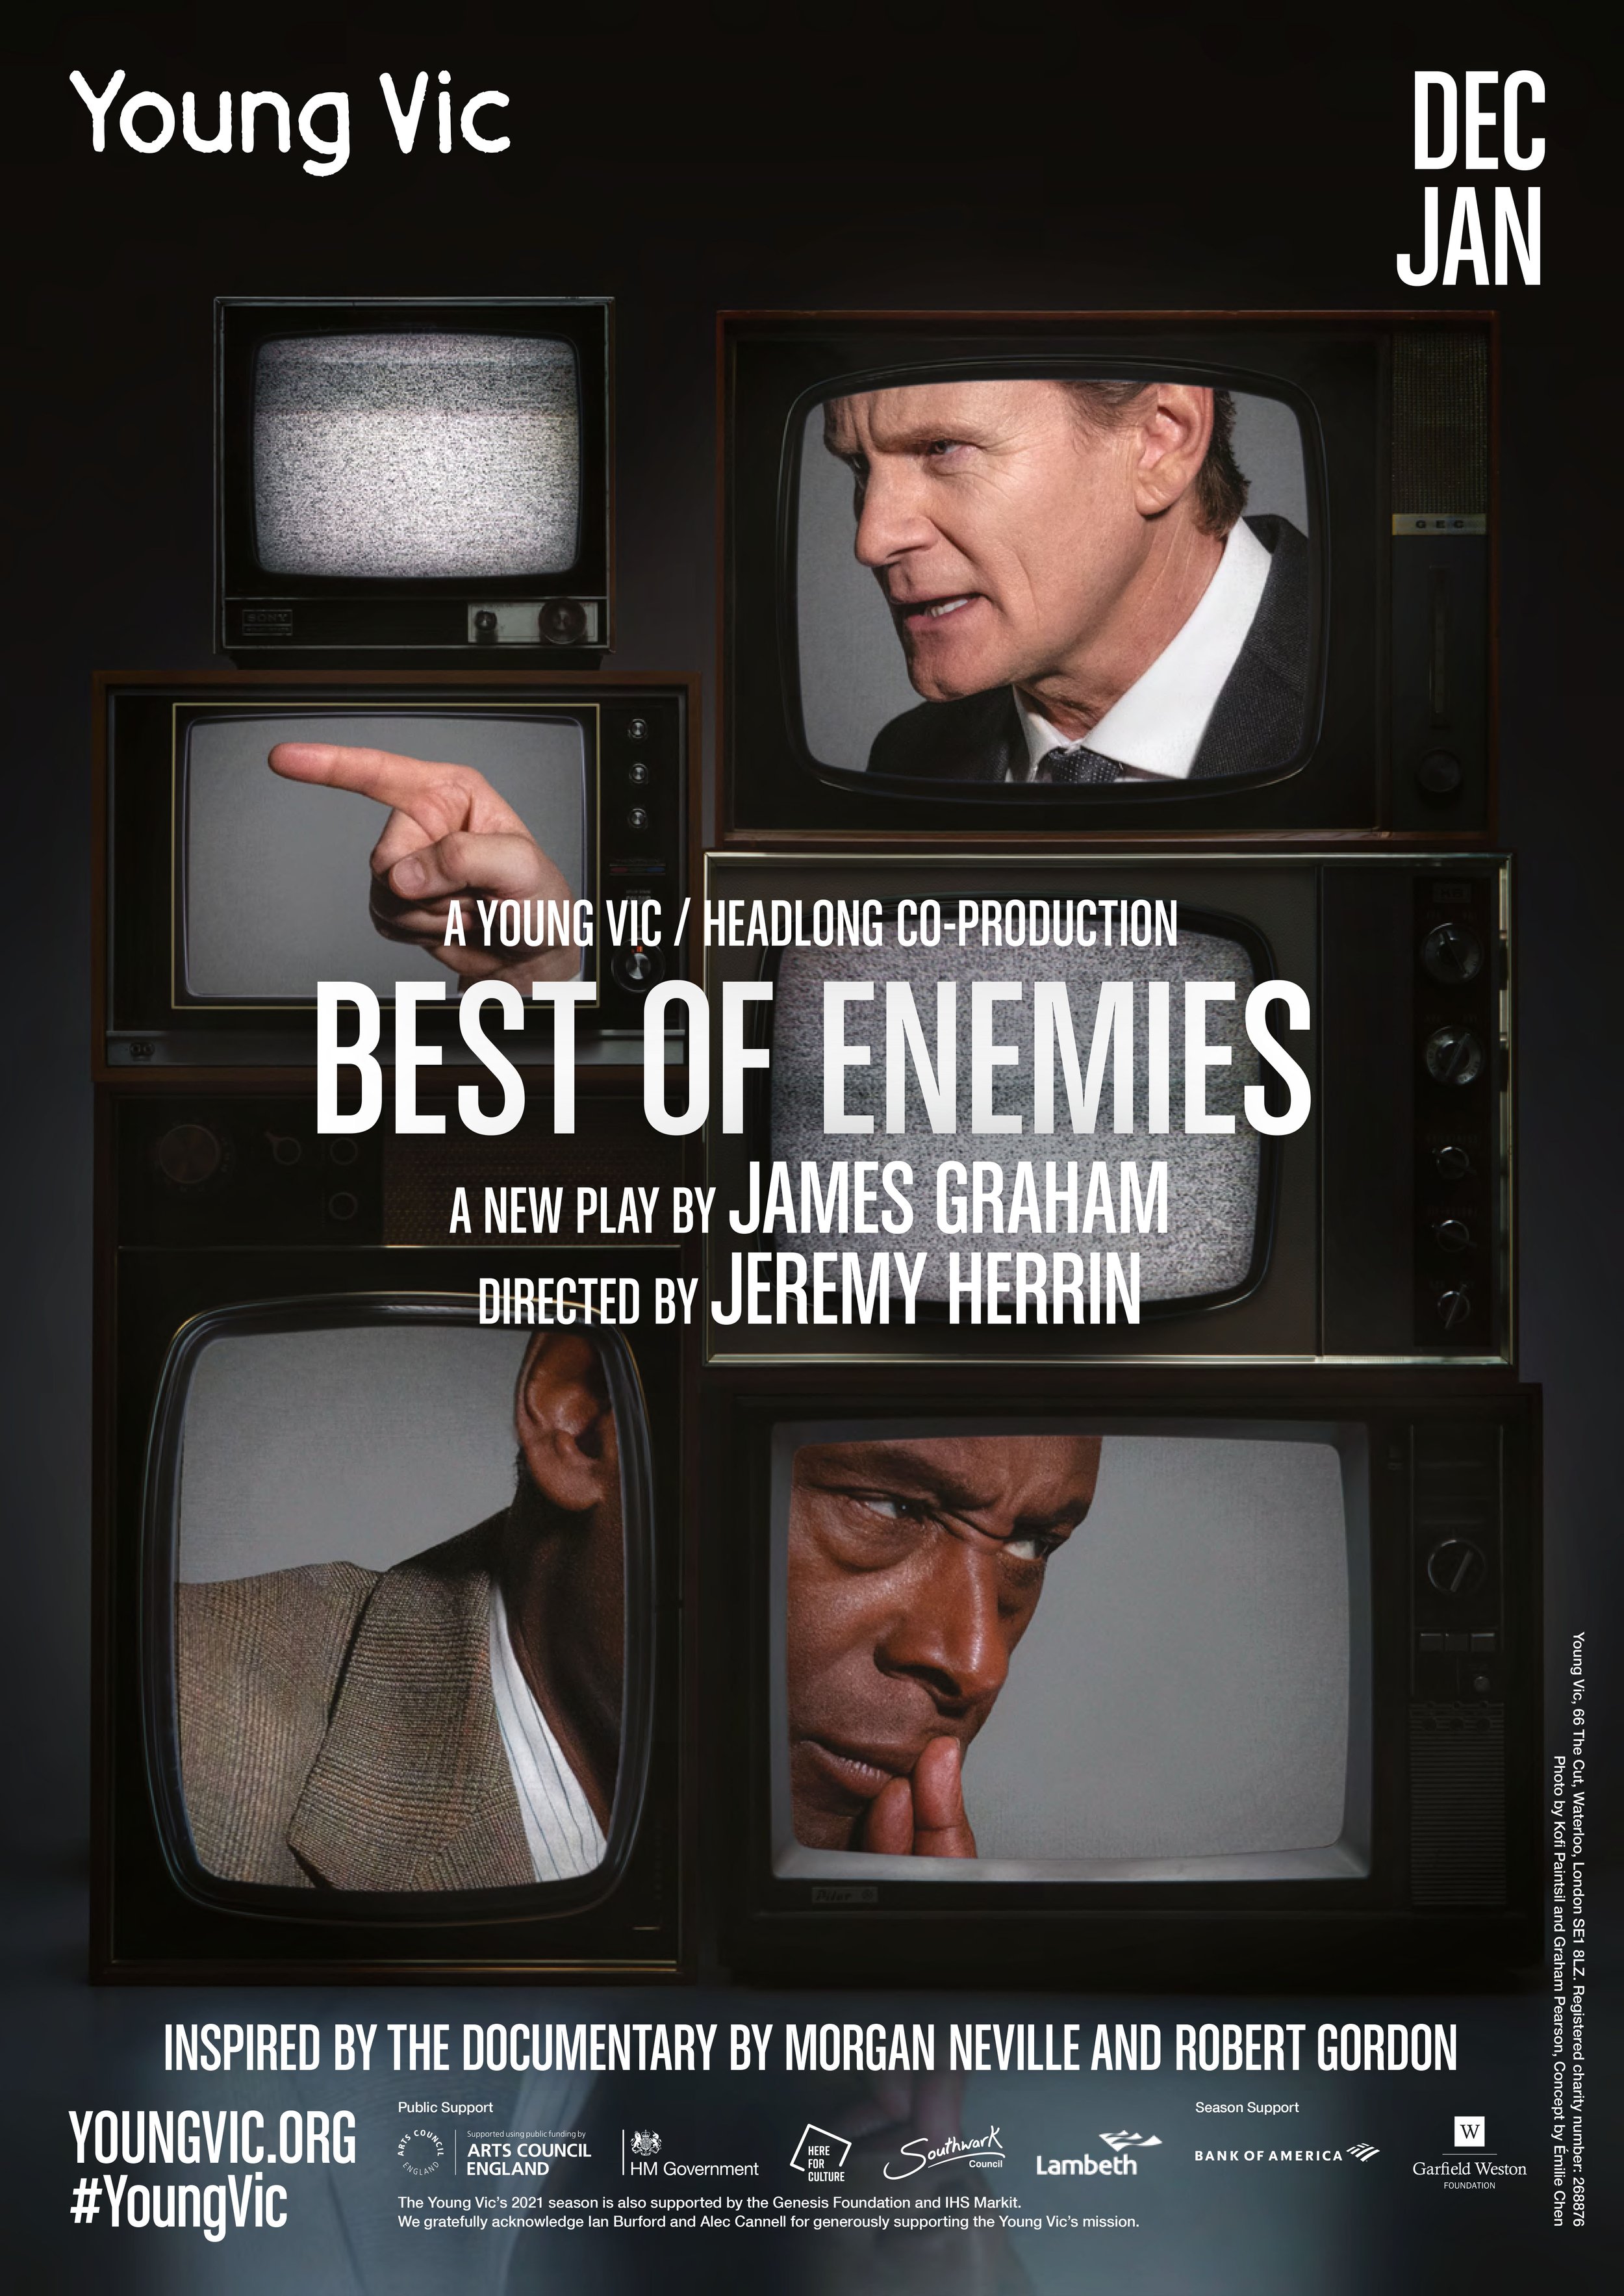 EzC_YoungVic_BestofEnemies_A0Poster_50%scale_Final(1)-1 copy.jpg